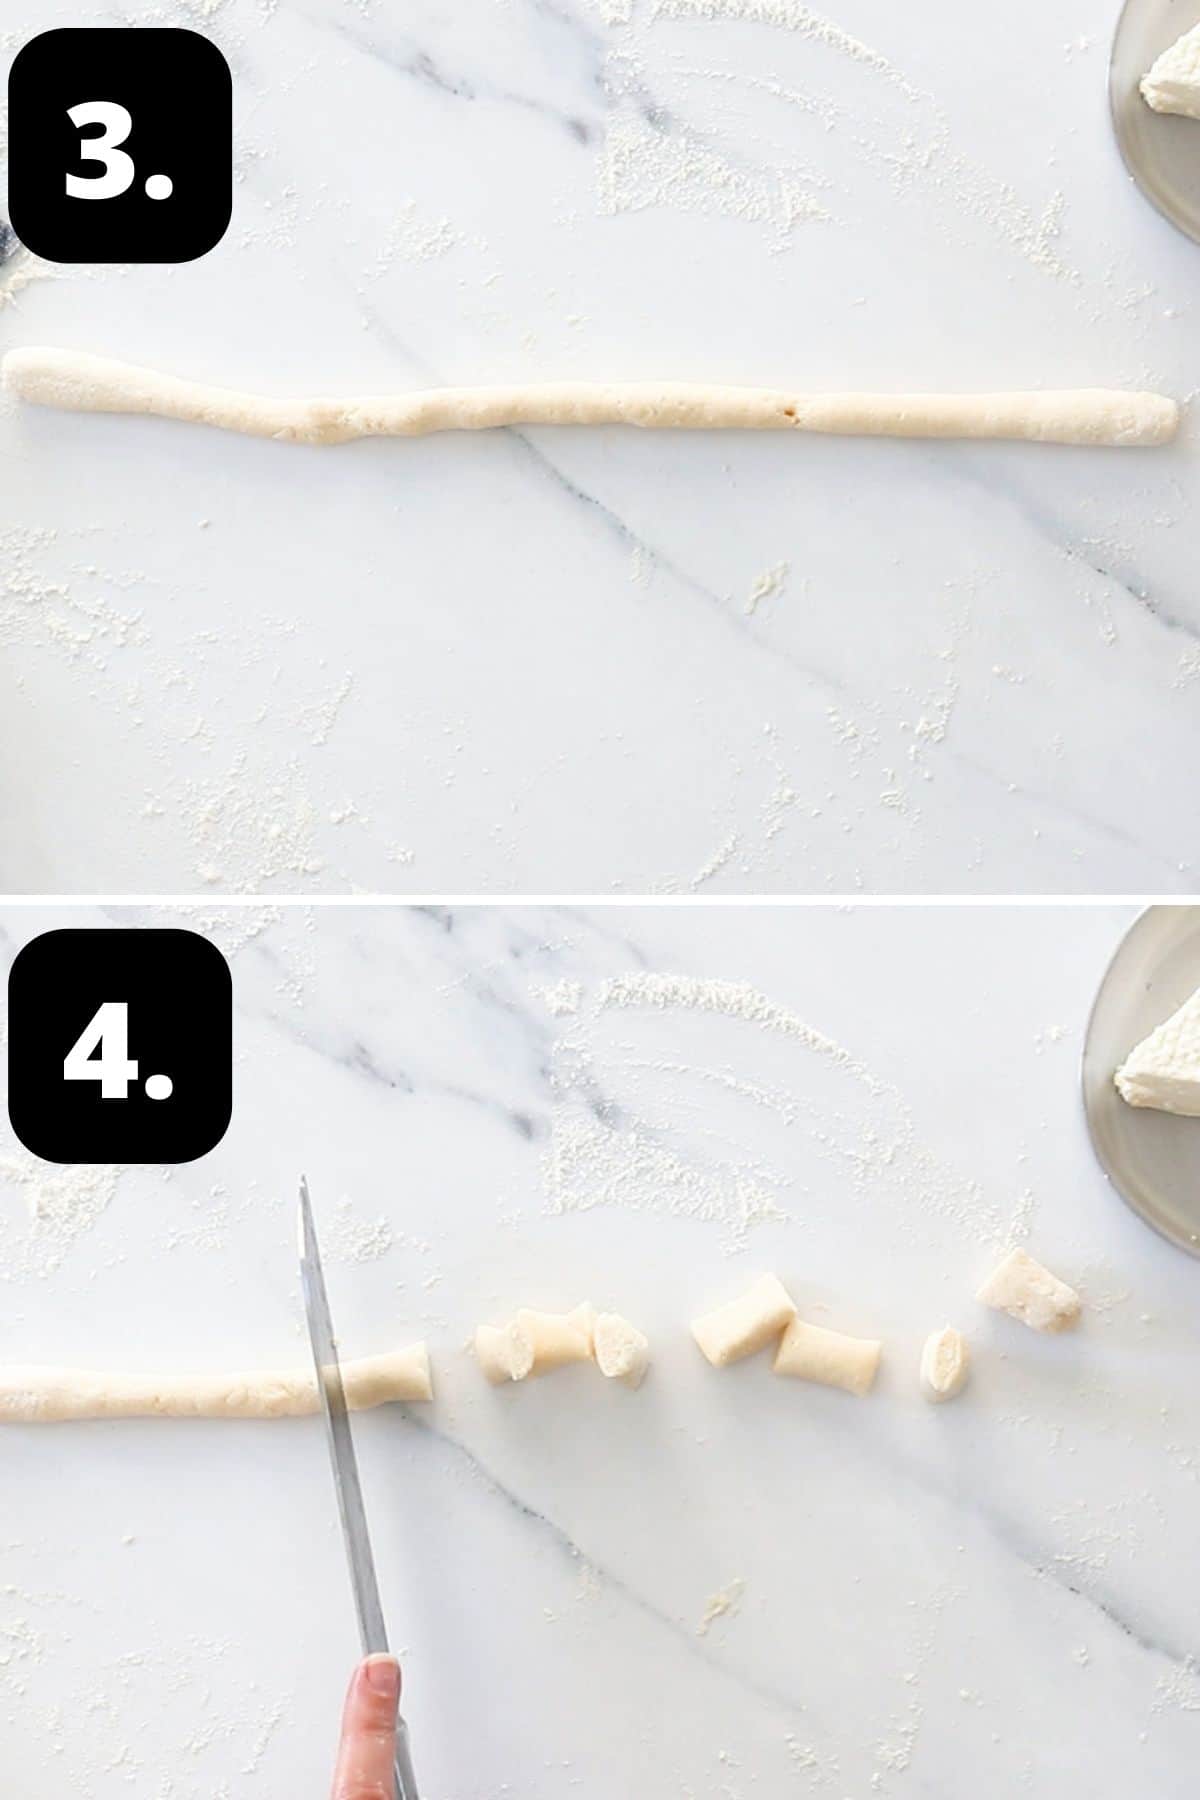 Steps 3-4 of preparing this recipe - rolling out some dough into a rope shape and cutting the gnocchi.